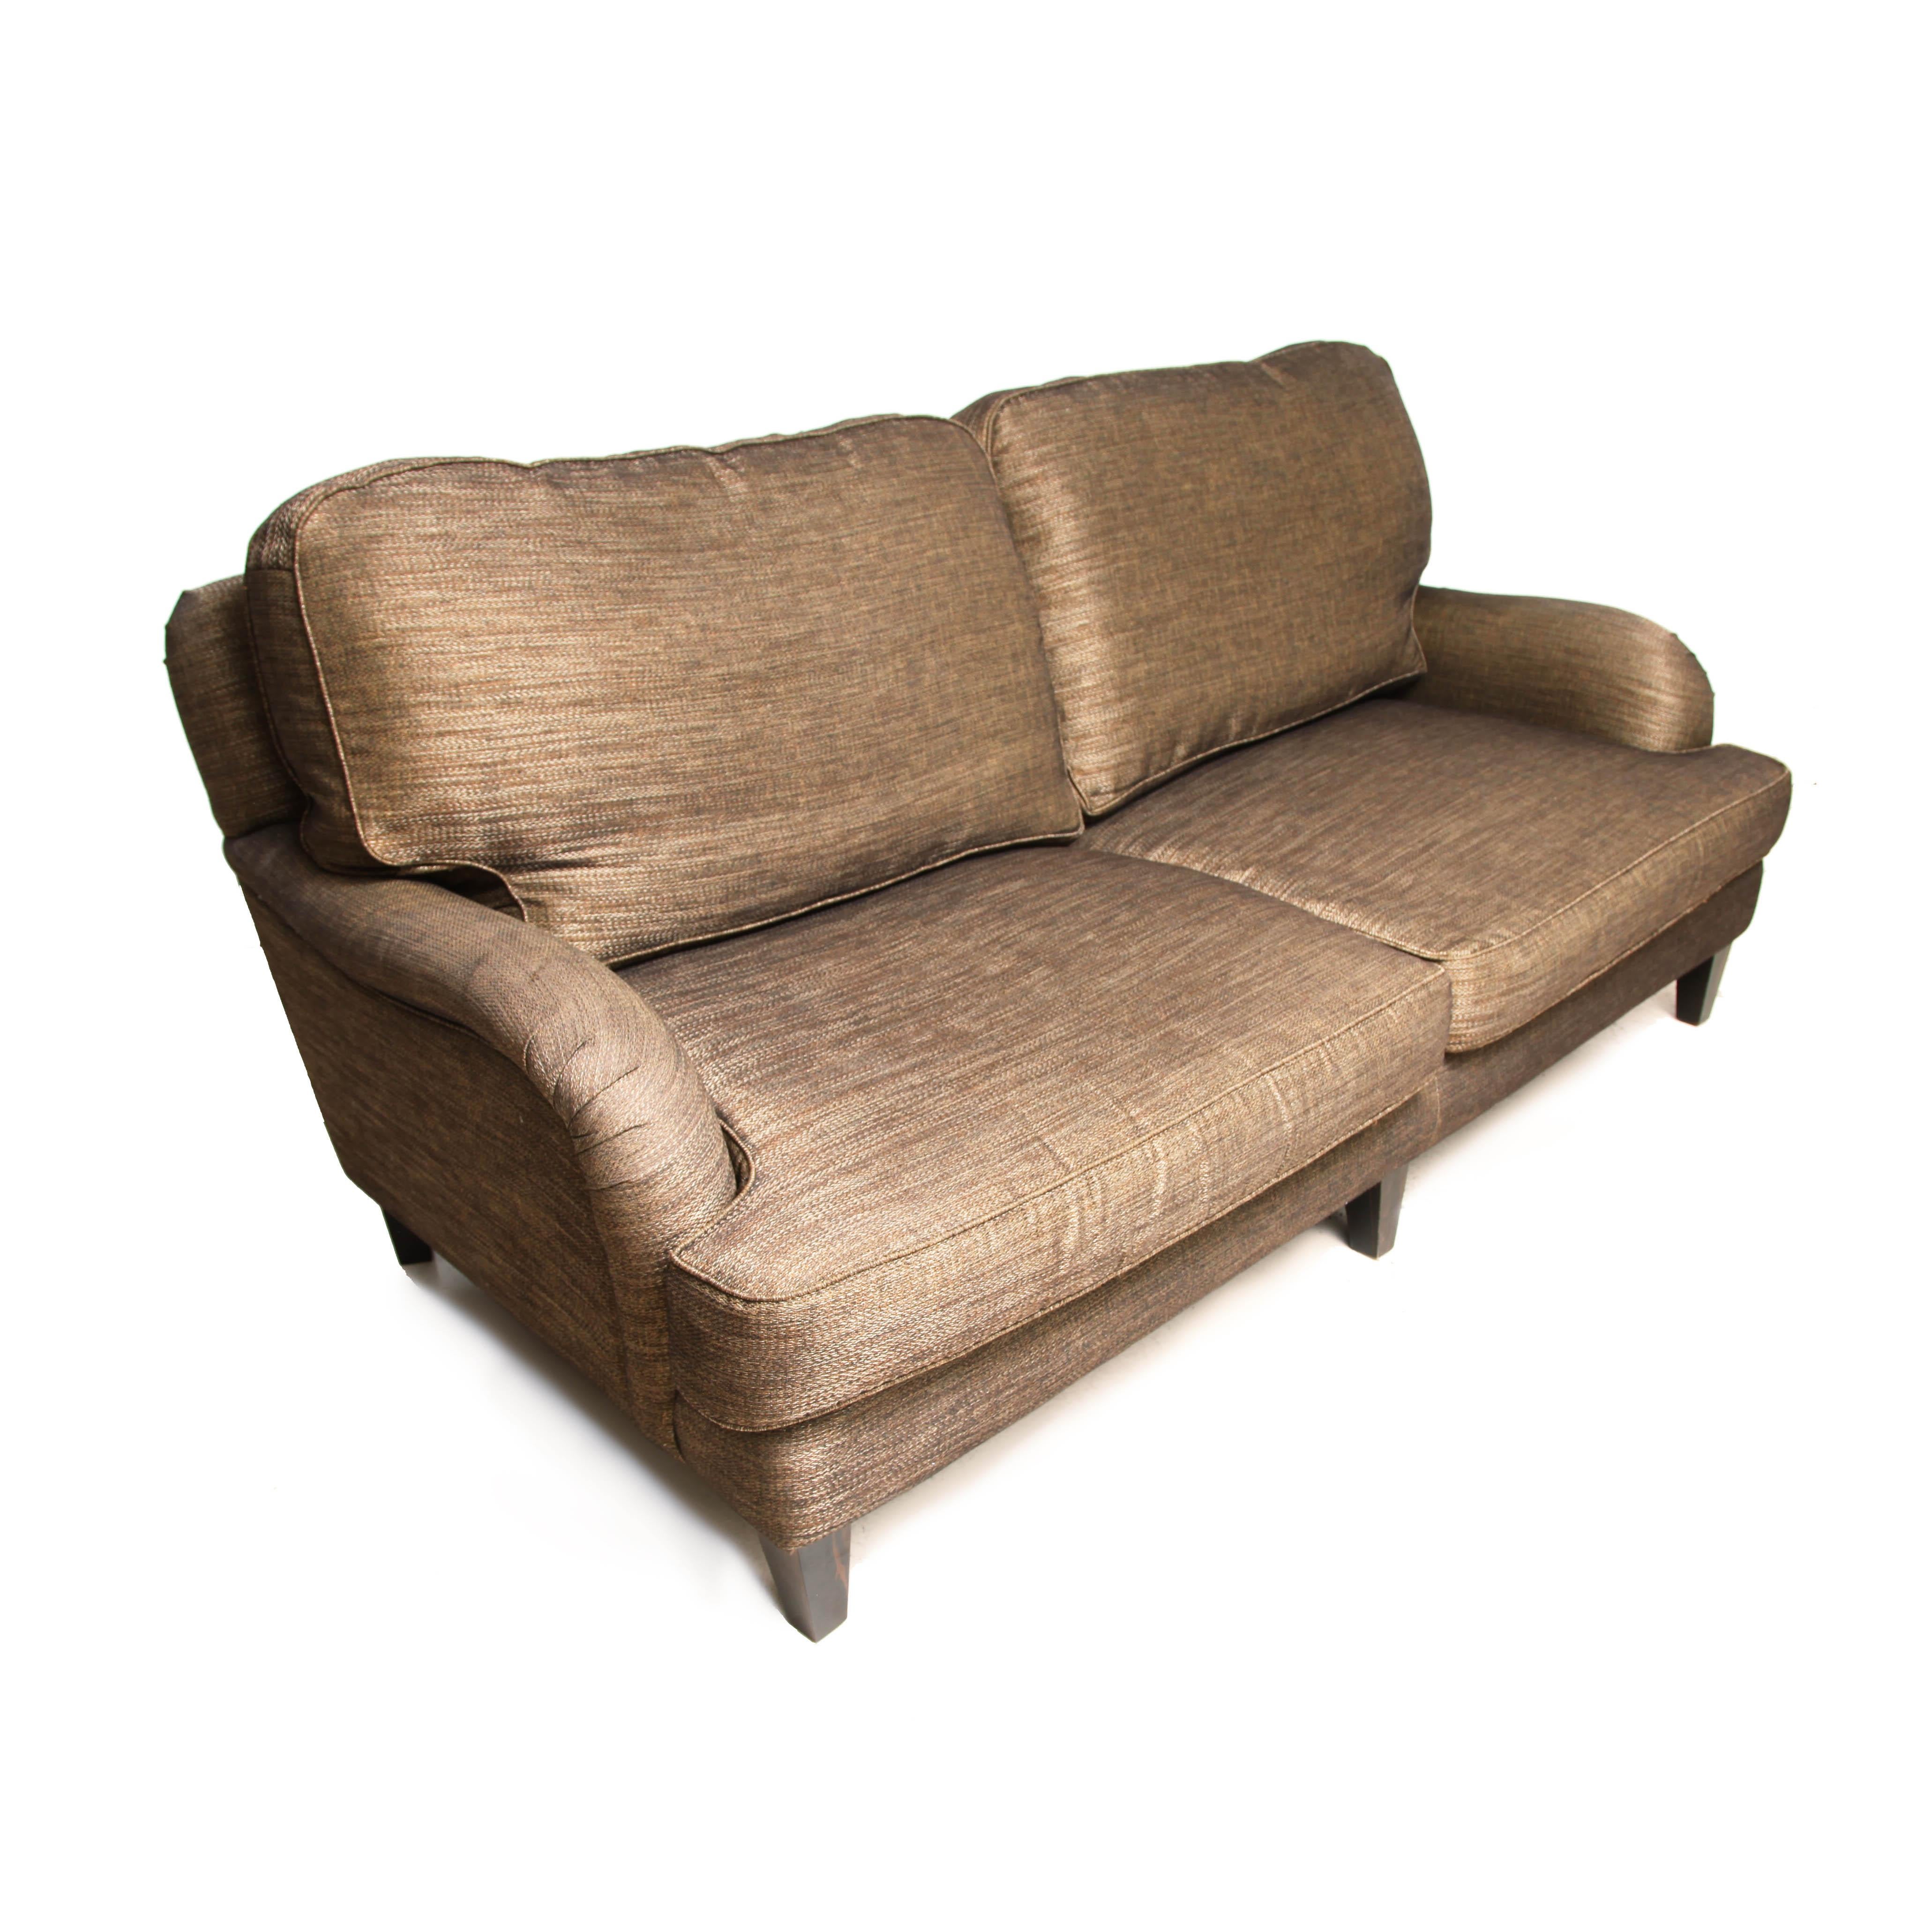 Classic Howard three-seat sofa in brass-gold-browny/bronzed effect upholstery fabric by Tamarisk and goose feathered filled cushions. Overall good condition and comfortable but the left arm side is water stained. Maybe it would benefit new